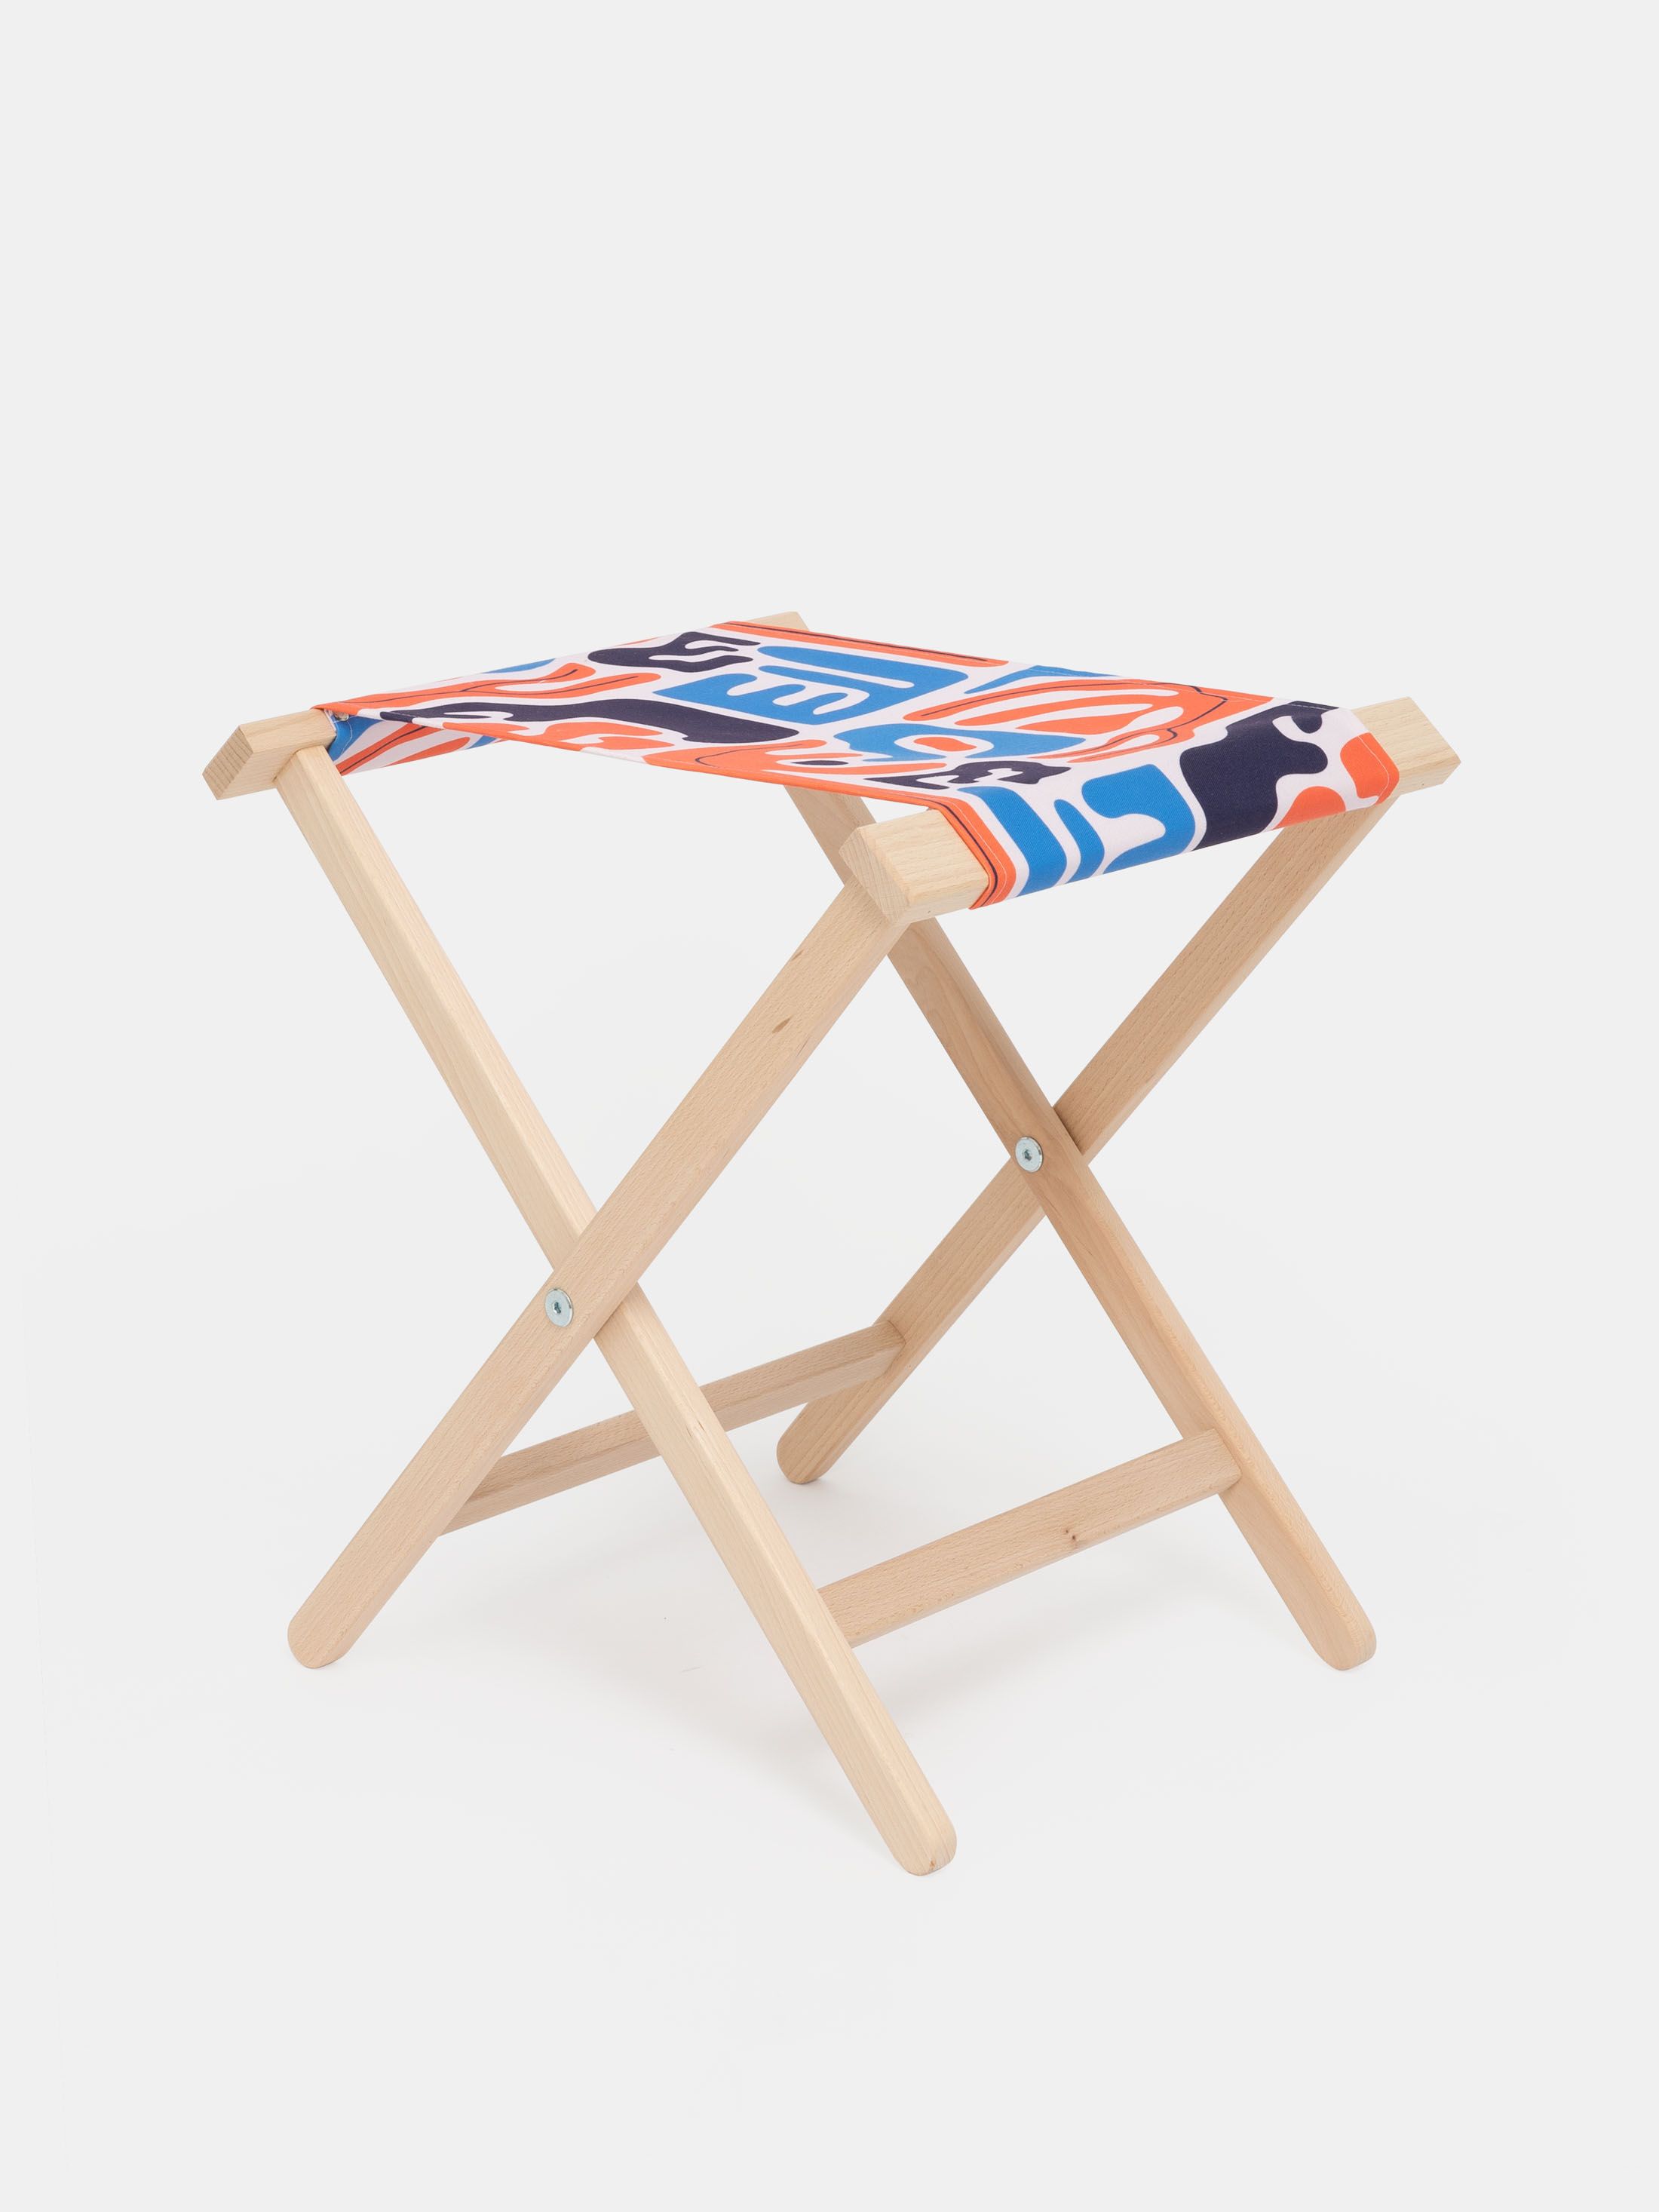 folding chairs printed with spring floral design